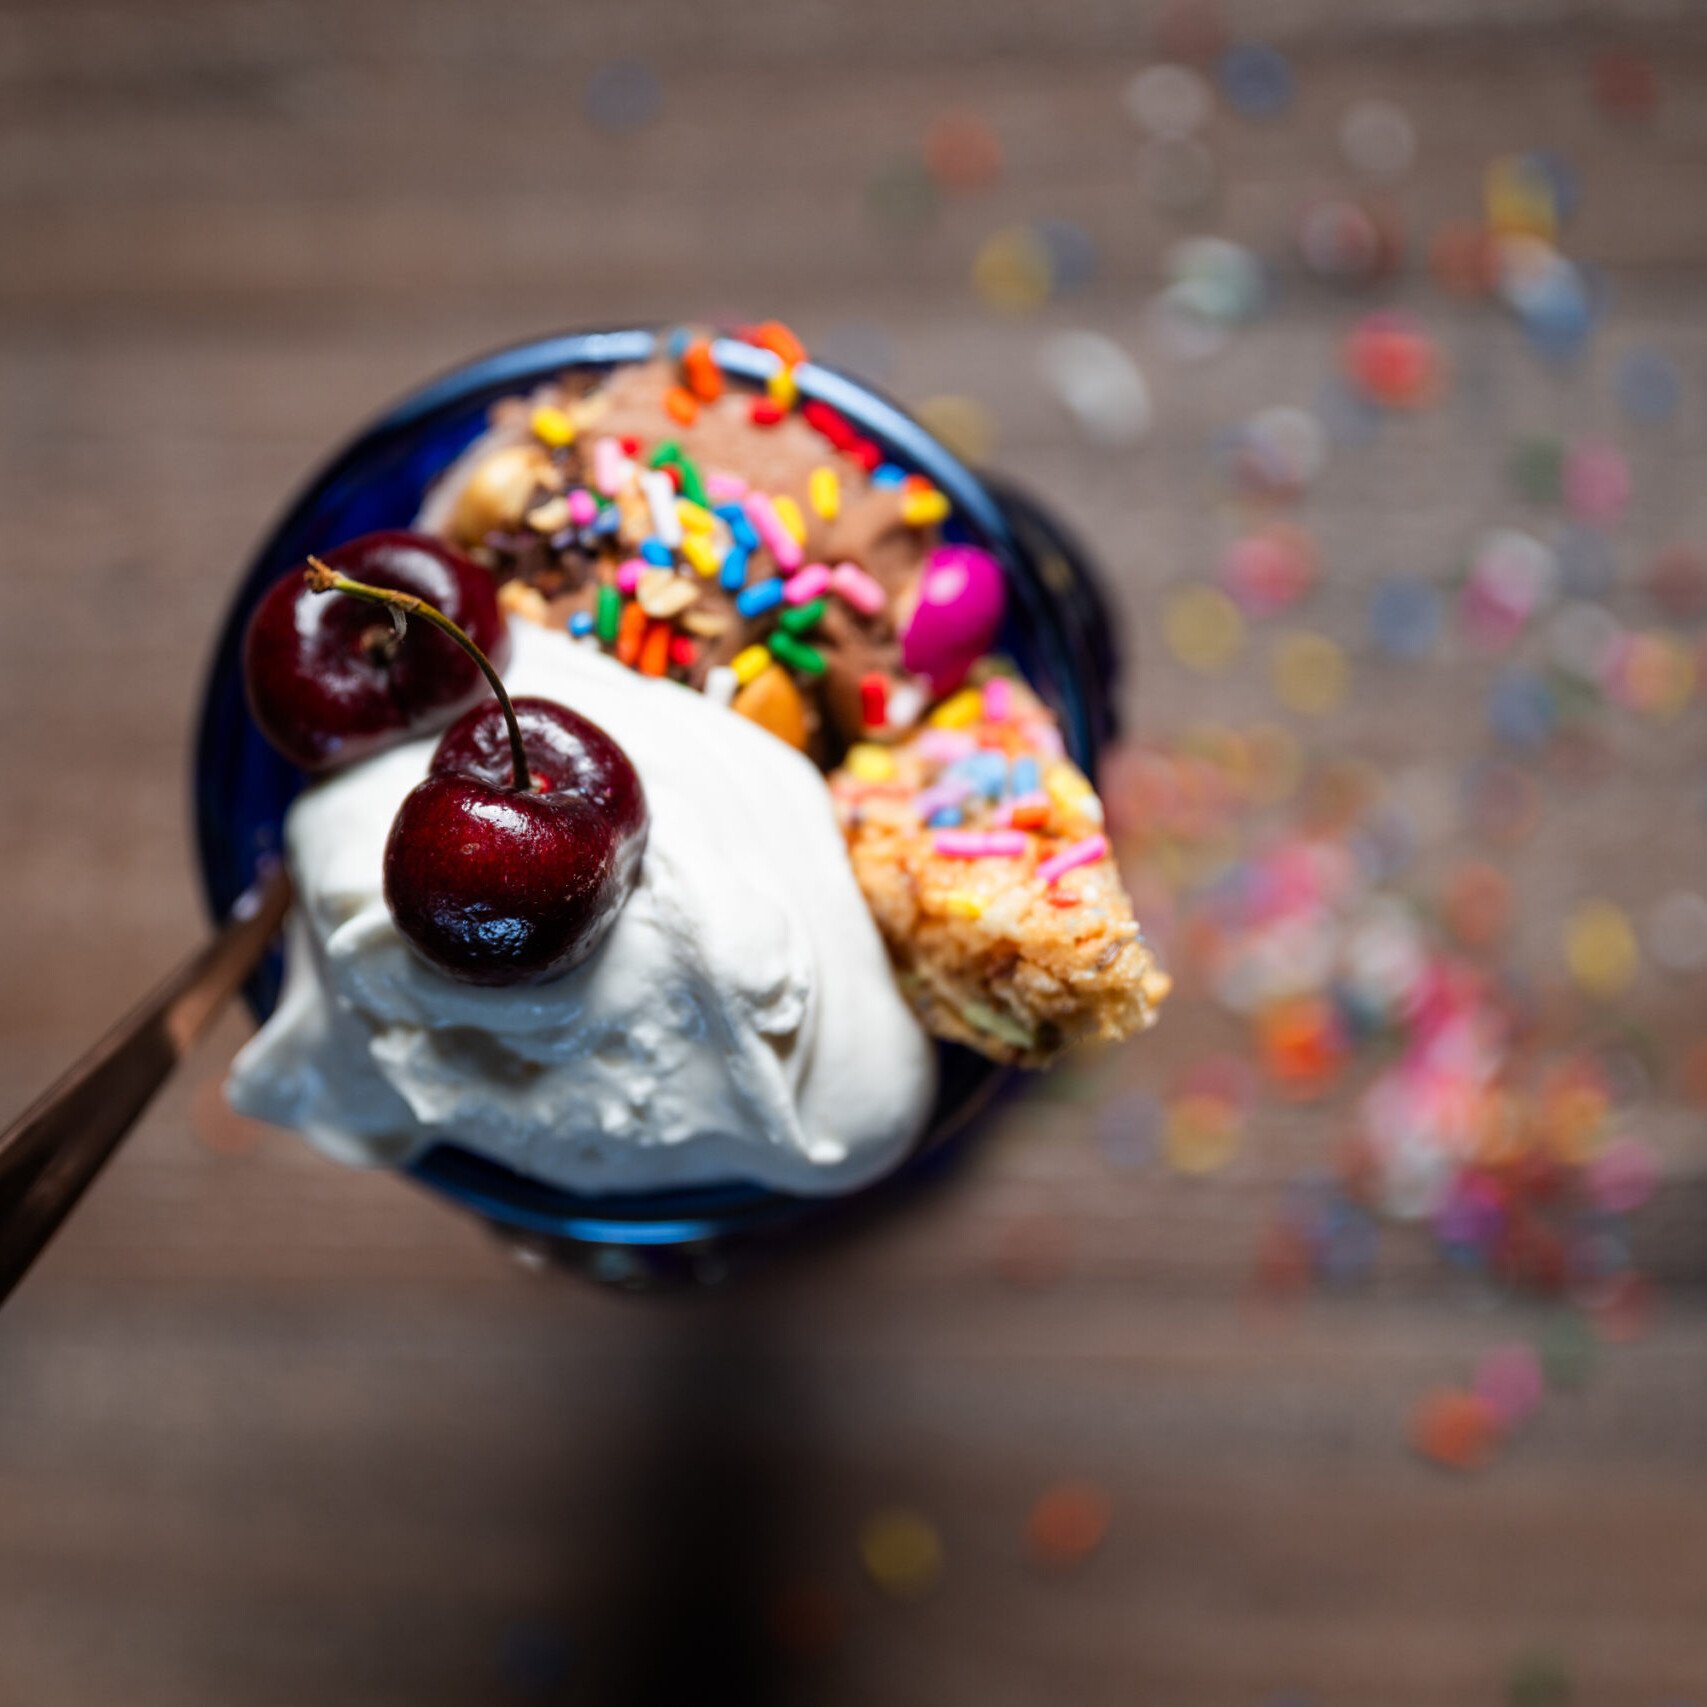 a blue glass filled with Vegan Chocolate Ice Cream (Nice Cream) Sundaes with whipped cream, sprinkles and a cherry